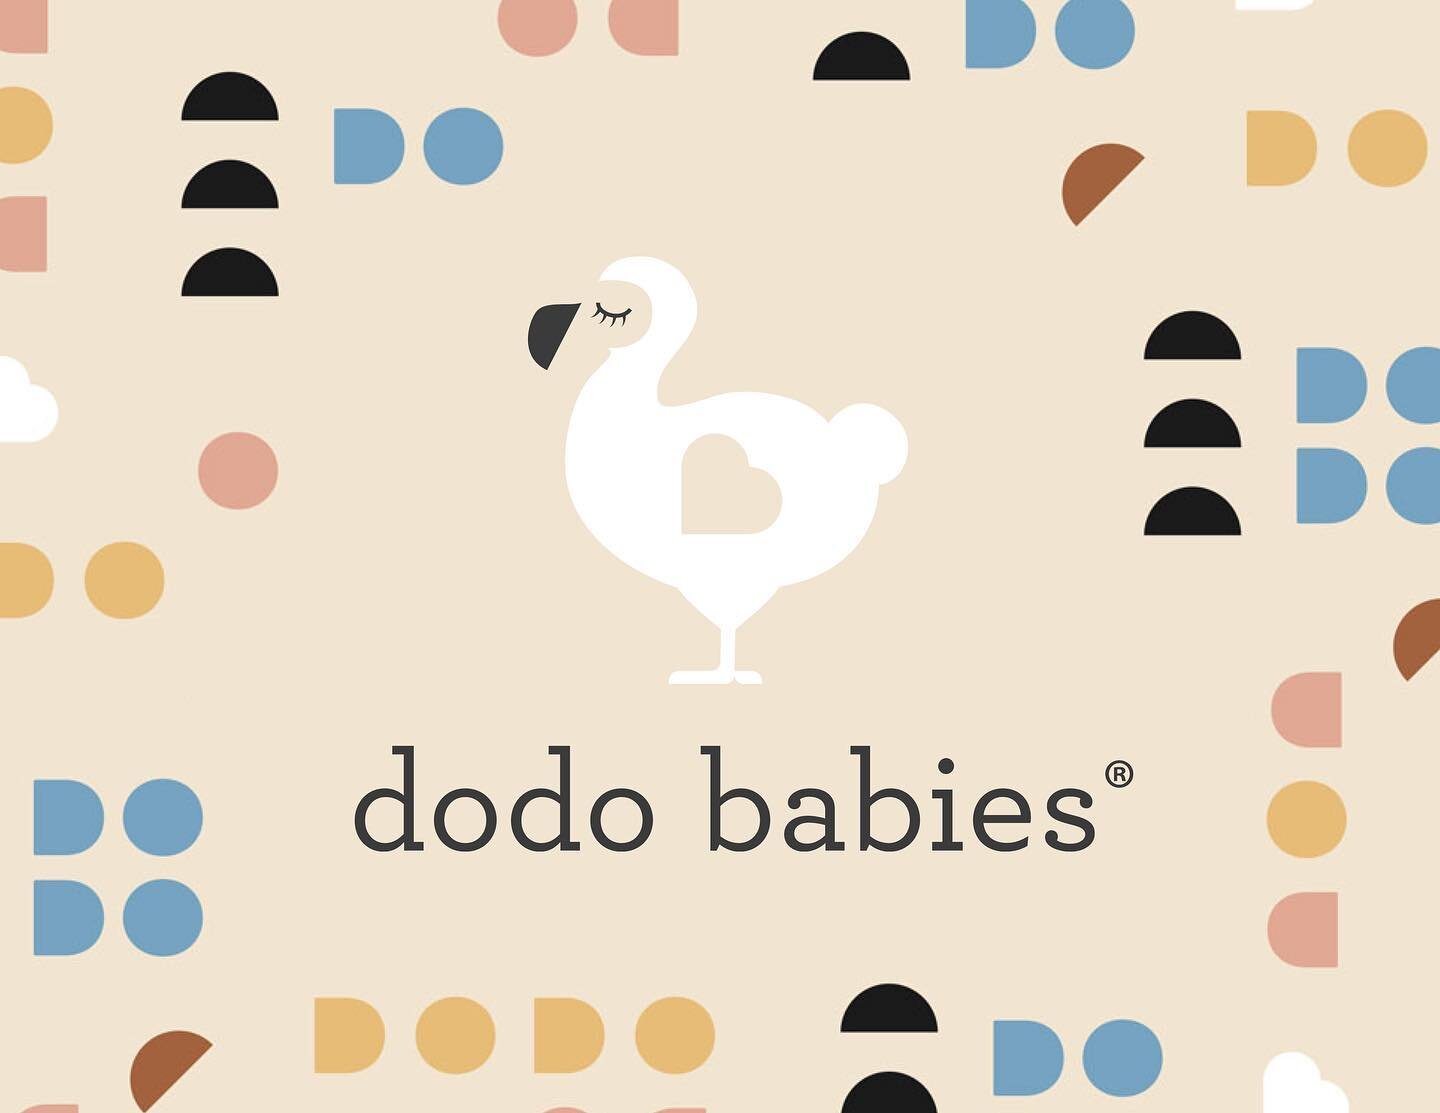 Only a few months after i became the target market, Dodo Babies&mdash;an online shop selling affordable everyday baby products&mdash;brought me on for a major overhaul of their brand. The new branding system includes everything from new logos to bib 